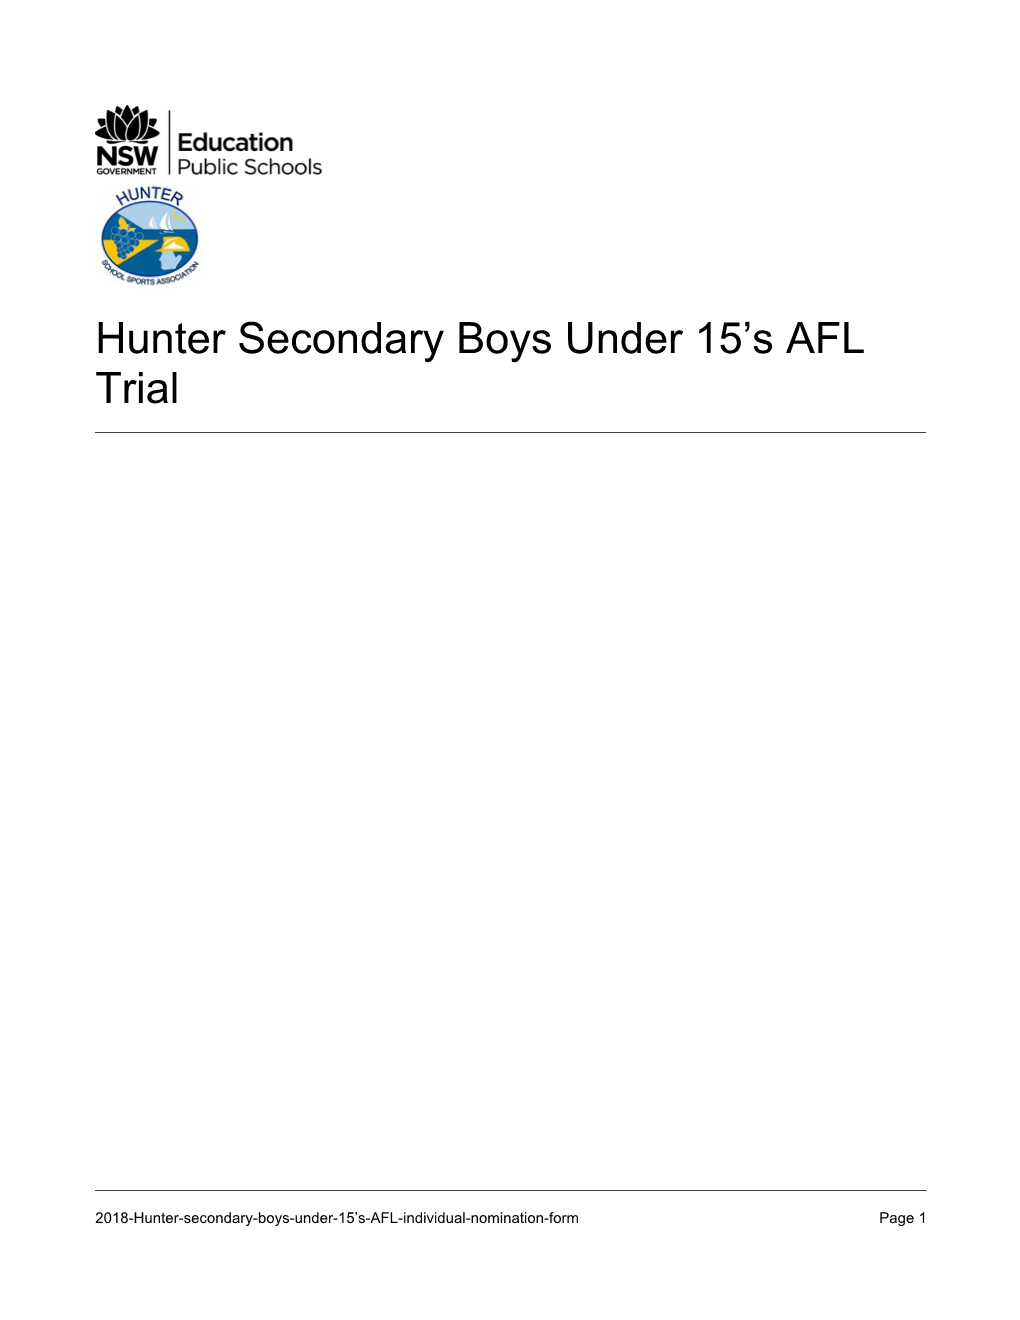 Hunter Secondary Boys Under 15'S AFL Trial Individual Nomination Form